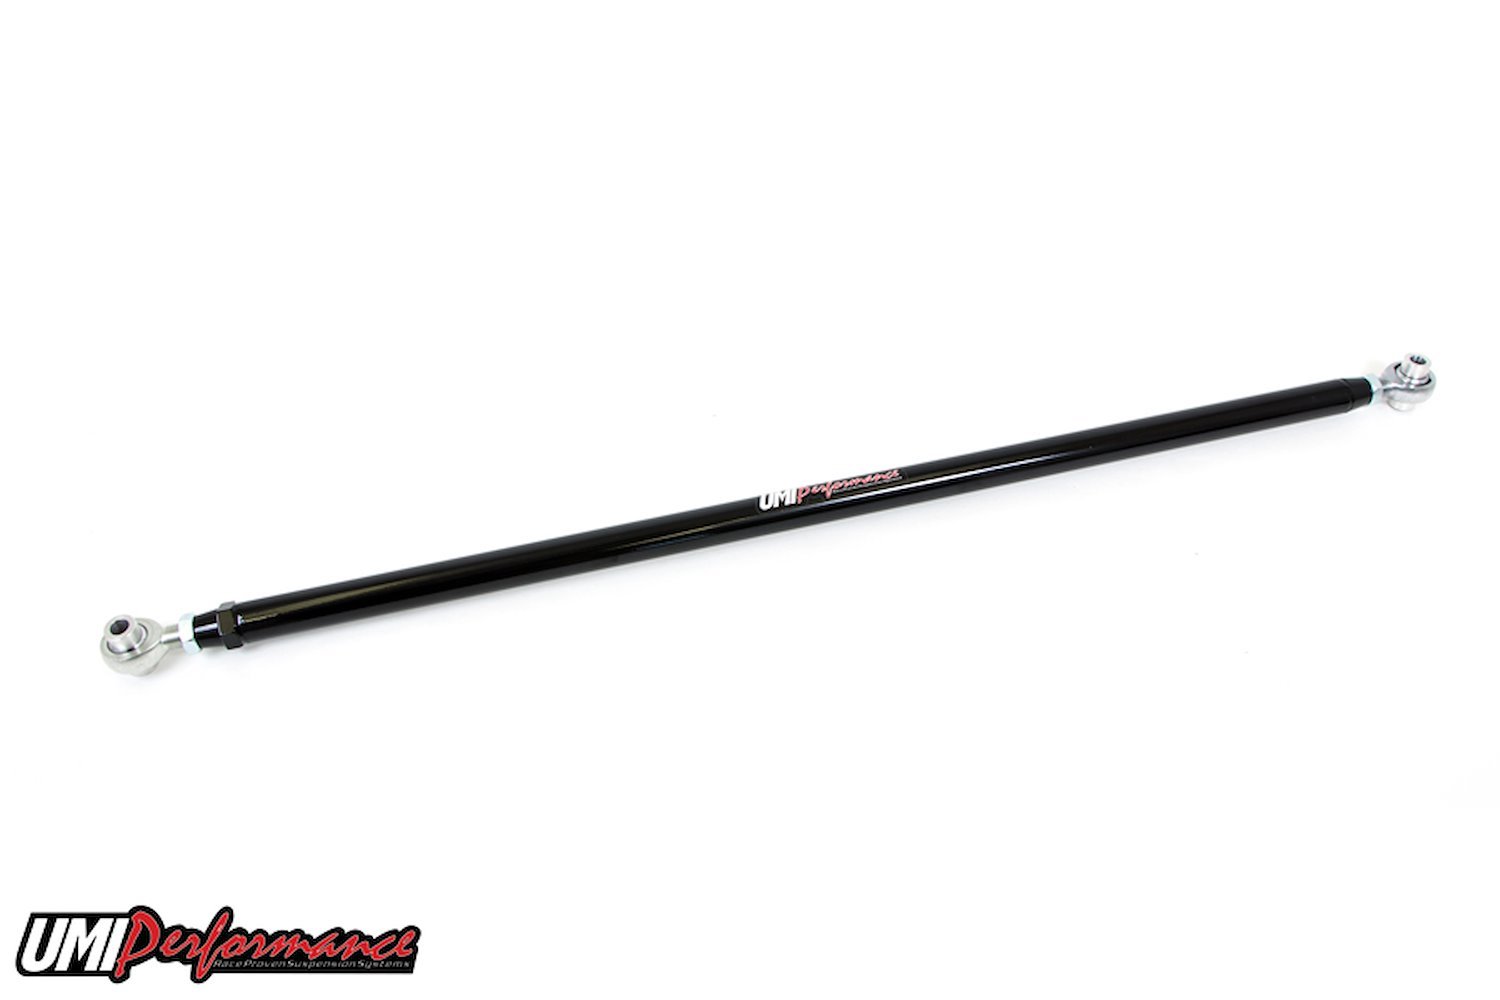 UMI?s double adjustable panhard bar is a must for rear end centering after vehicle lowering as well